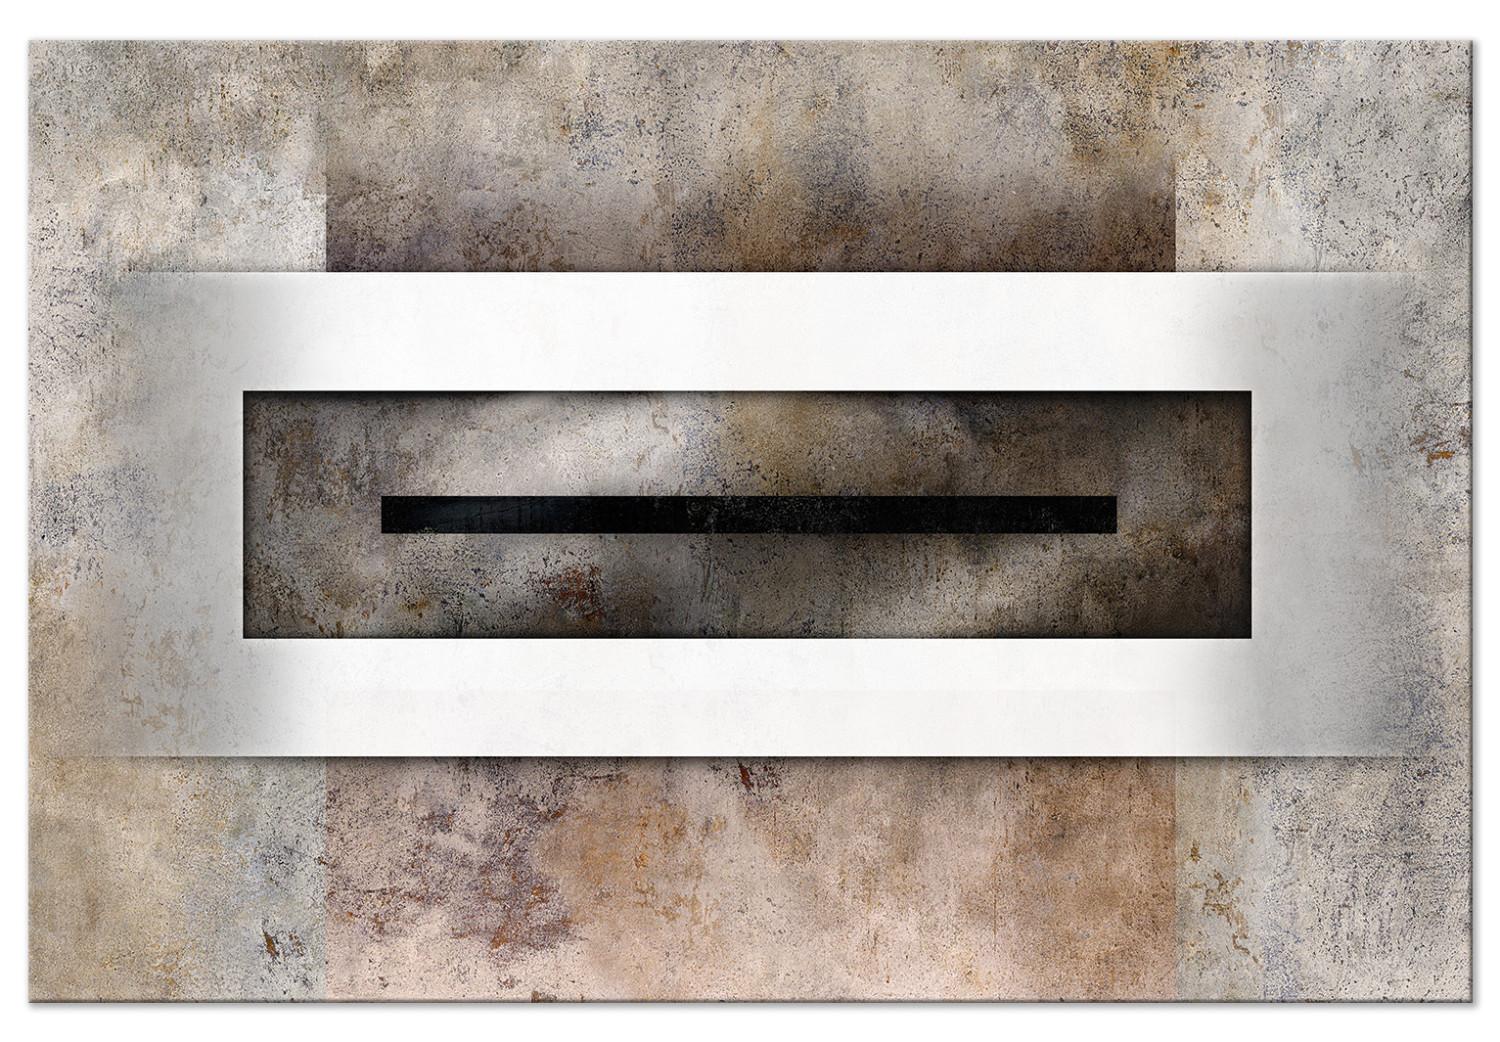 Cuadro Abstraction - Black Rectangle in a White Frame on a Beige Background